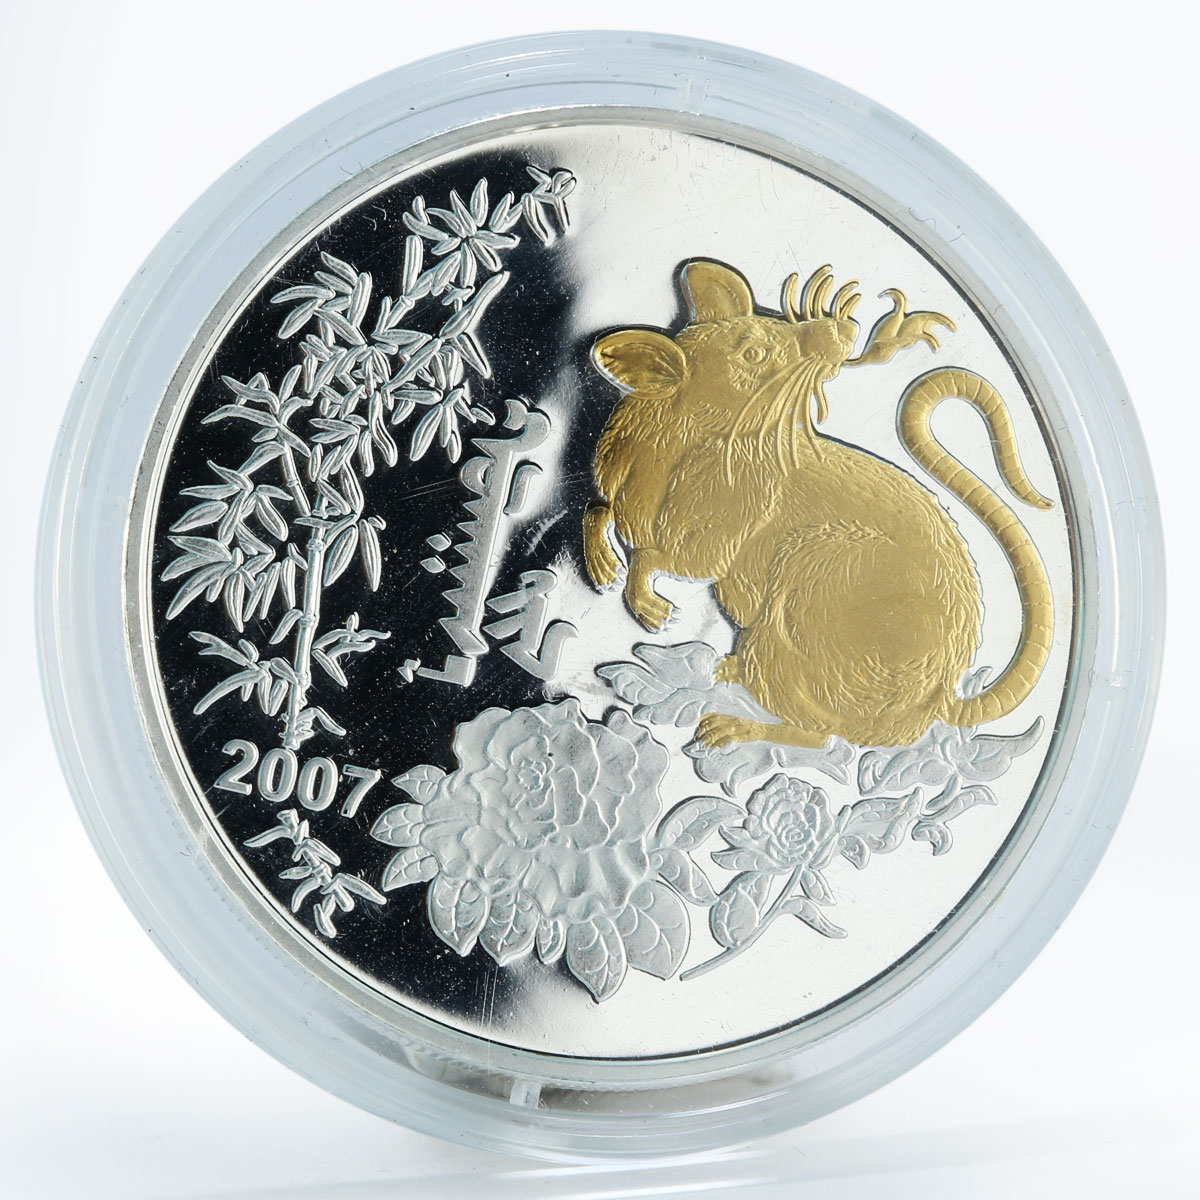 Mongolia 500 togrog Year of the Rat Chinese Calendar silver gilded coin 2007